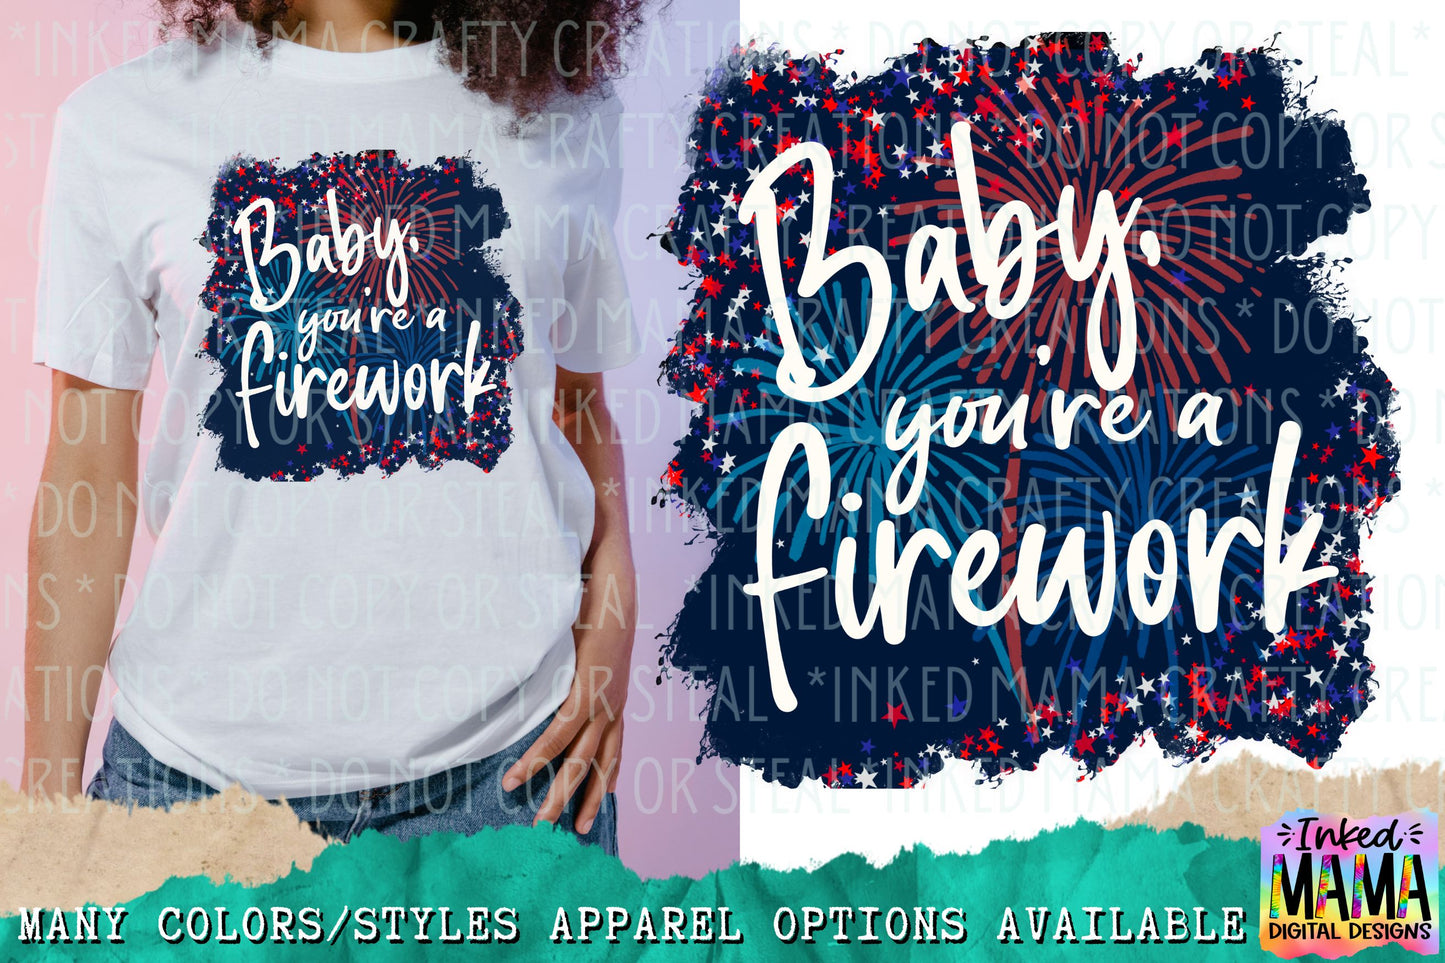 Baby, you're a firework - USA 4th of July - Apparel